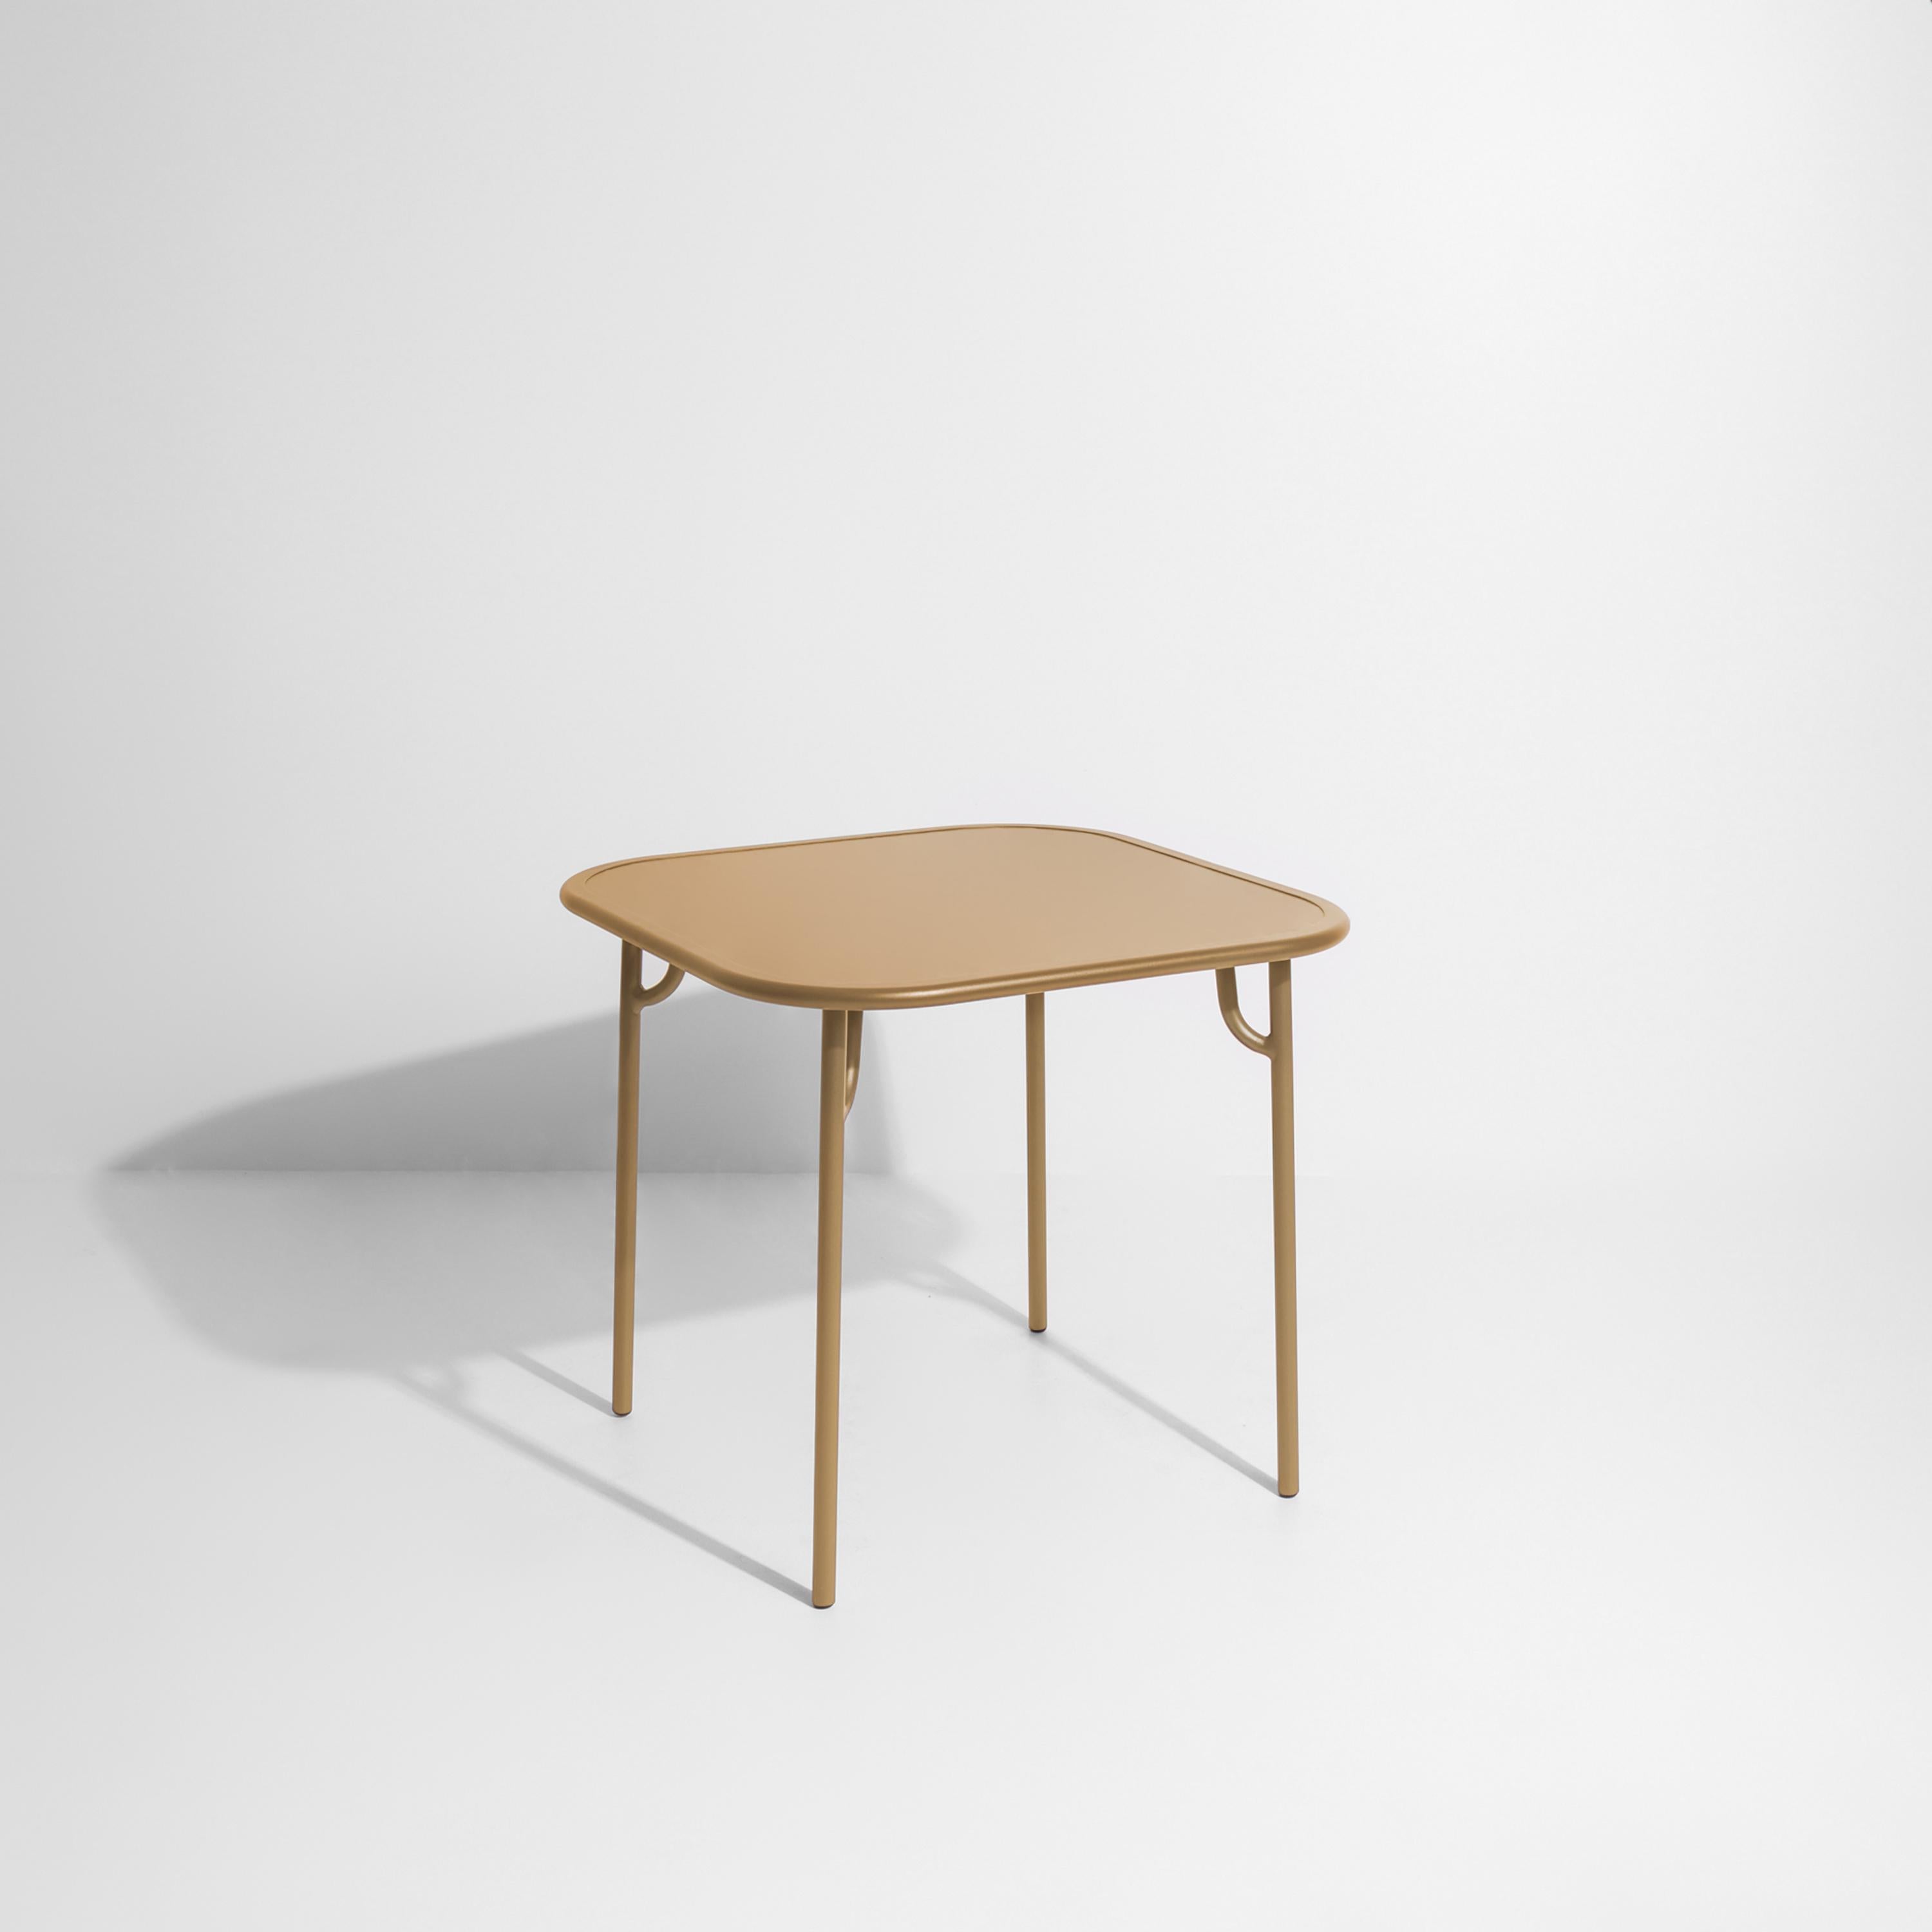 Petite Friture Week-End Plain Square Dining Table in Gold Aluminium by Studio BrichetZiegler, 2017

The week-end collection is a full range of outdoor furniture, in aluminium grained epoxy paint, matt finish, that includes 18 functions and 8